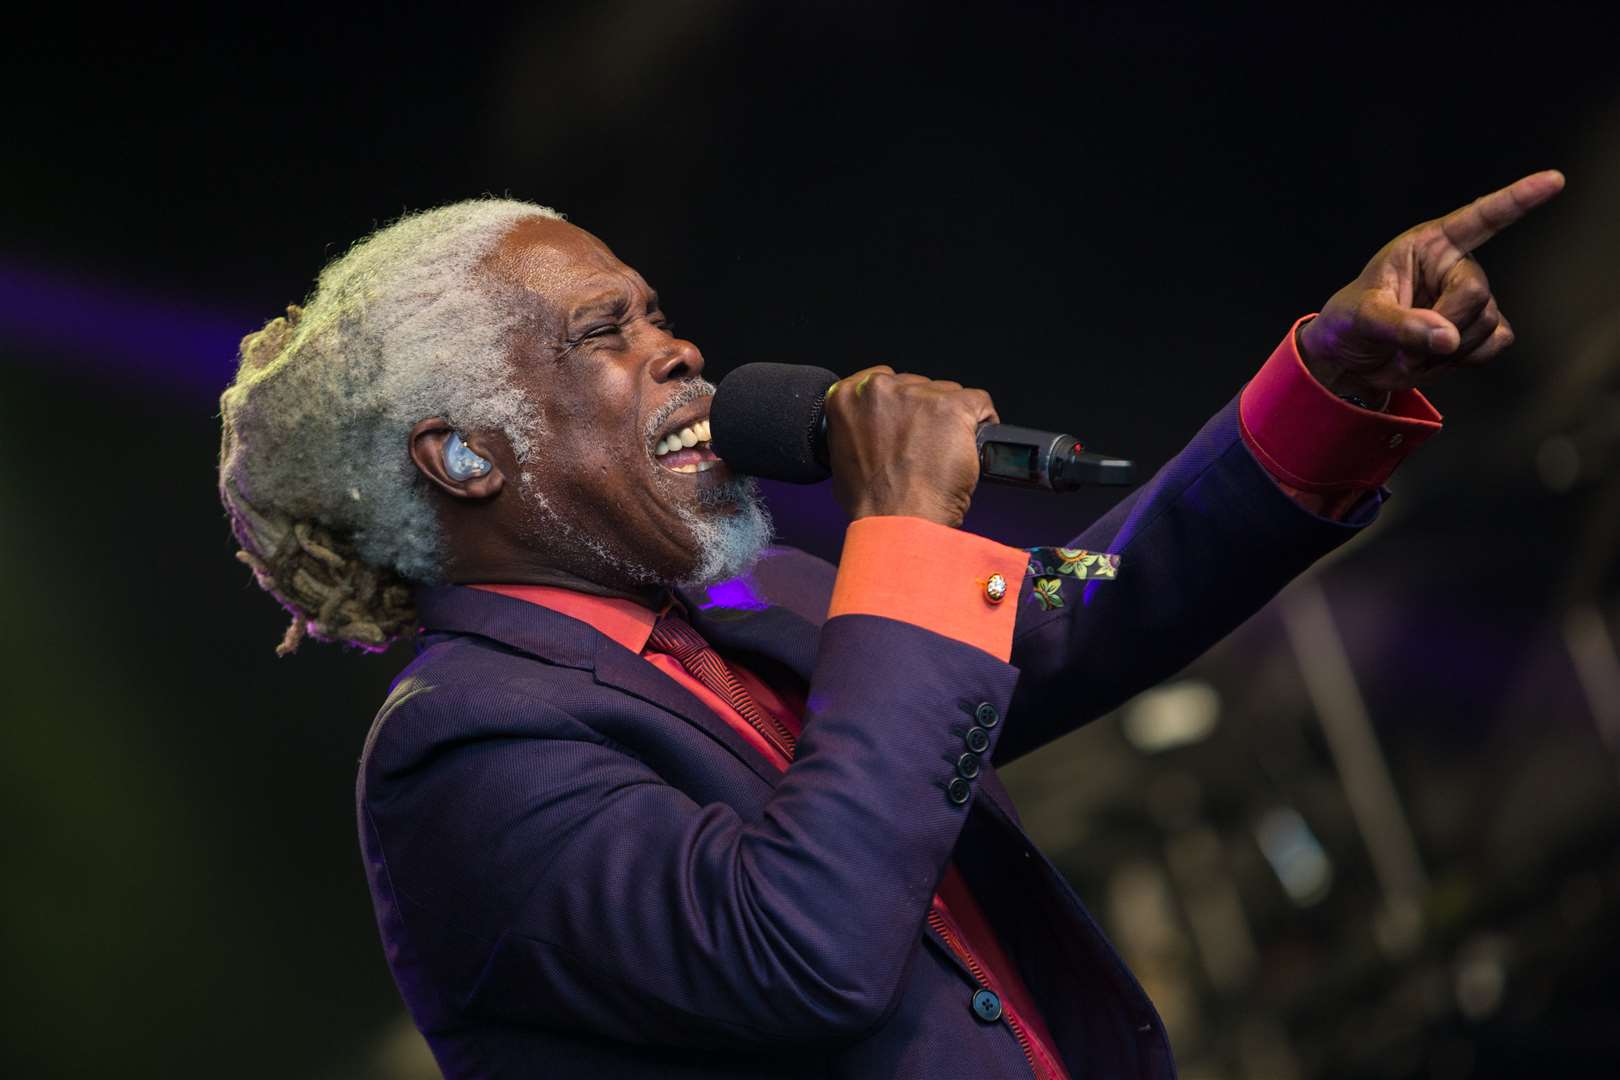 Billy Ocean performing at the Hop Farm Music Festival last year.